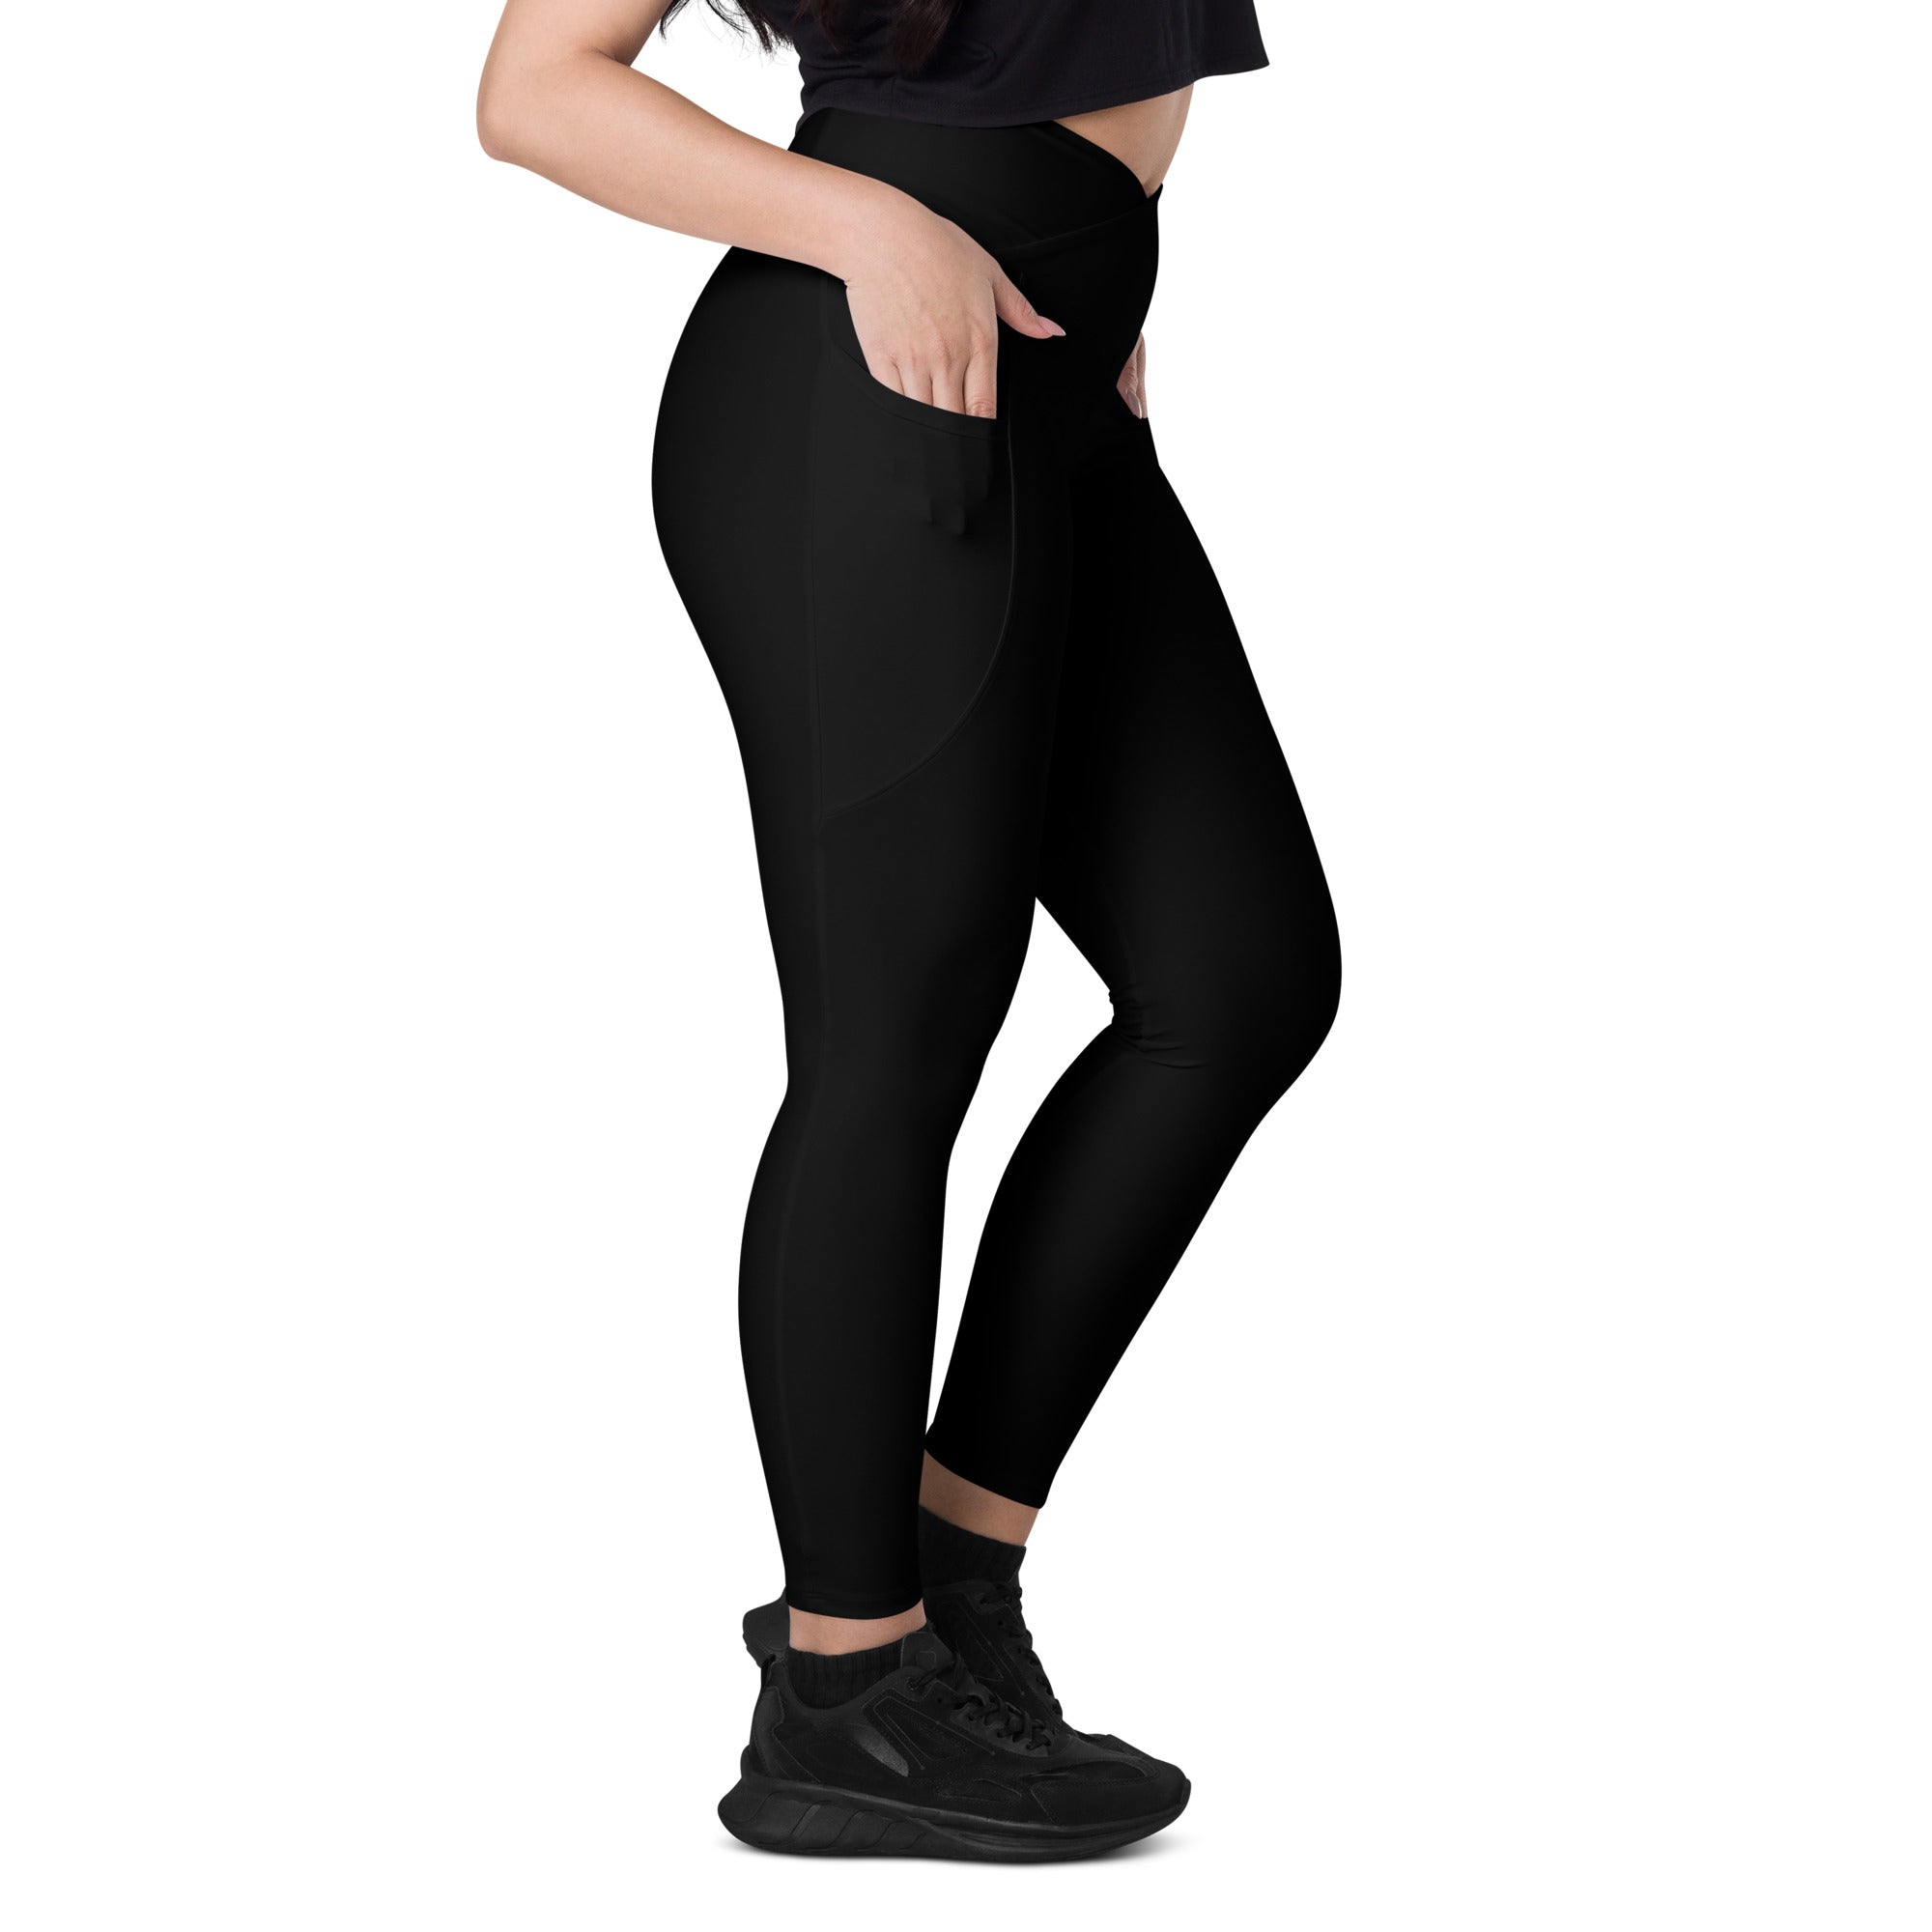 Lovable Cuties Black Crossover Leggings with Pockets